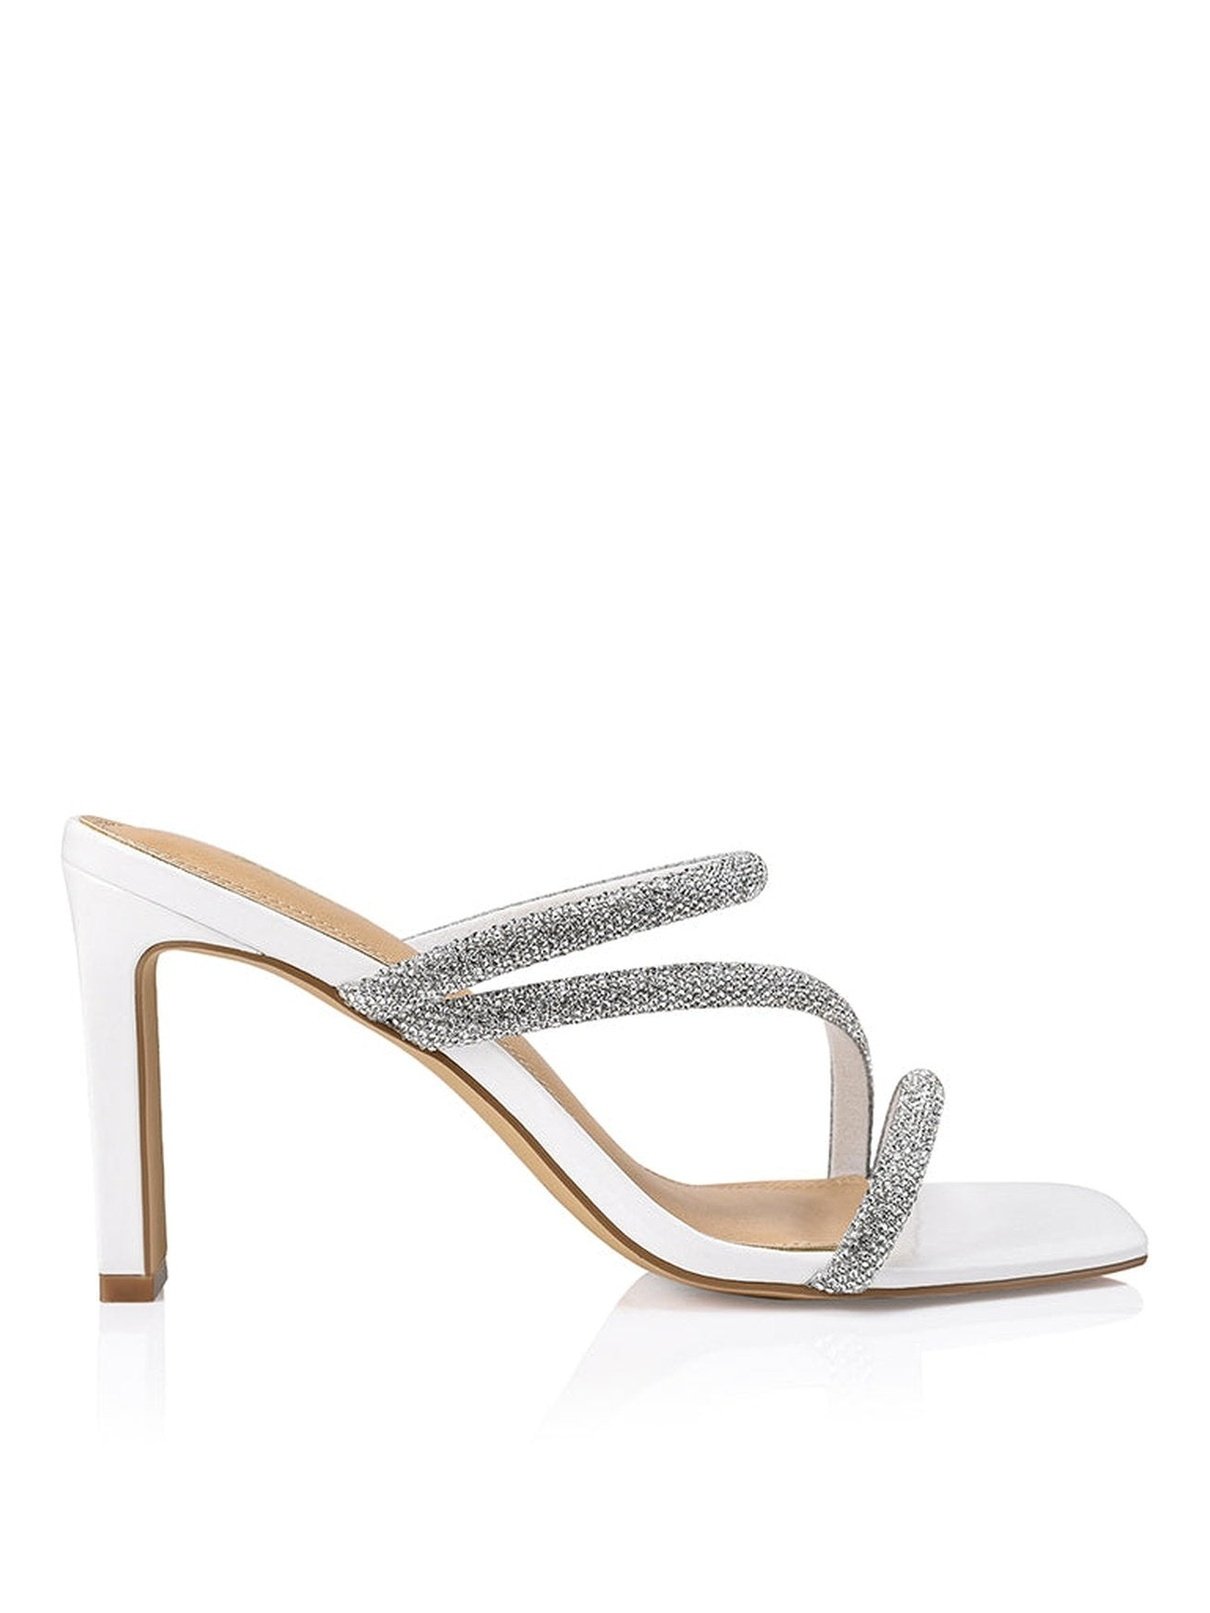 Miss Chicago Heeled  Sandals - White Leather